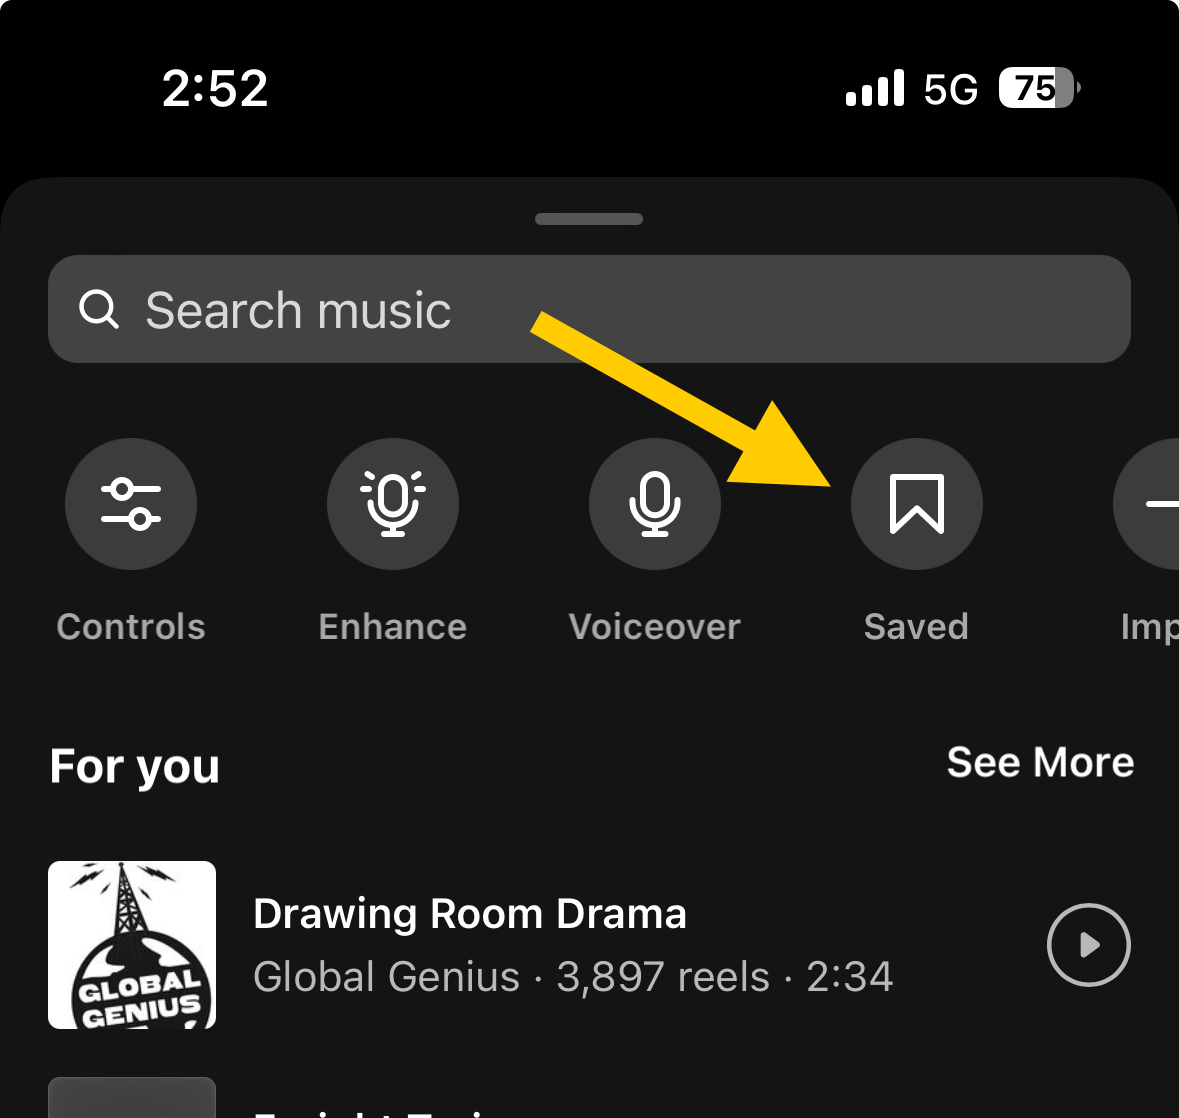 How to Save Music and Use the "Saved Music" Feature on Instagram 3